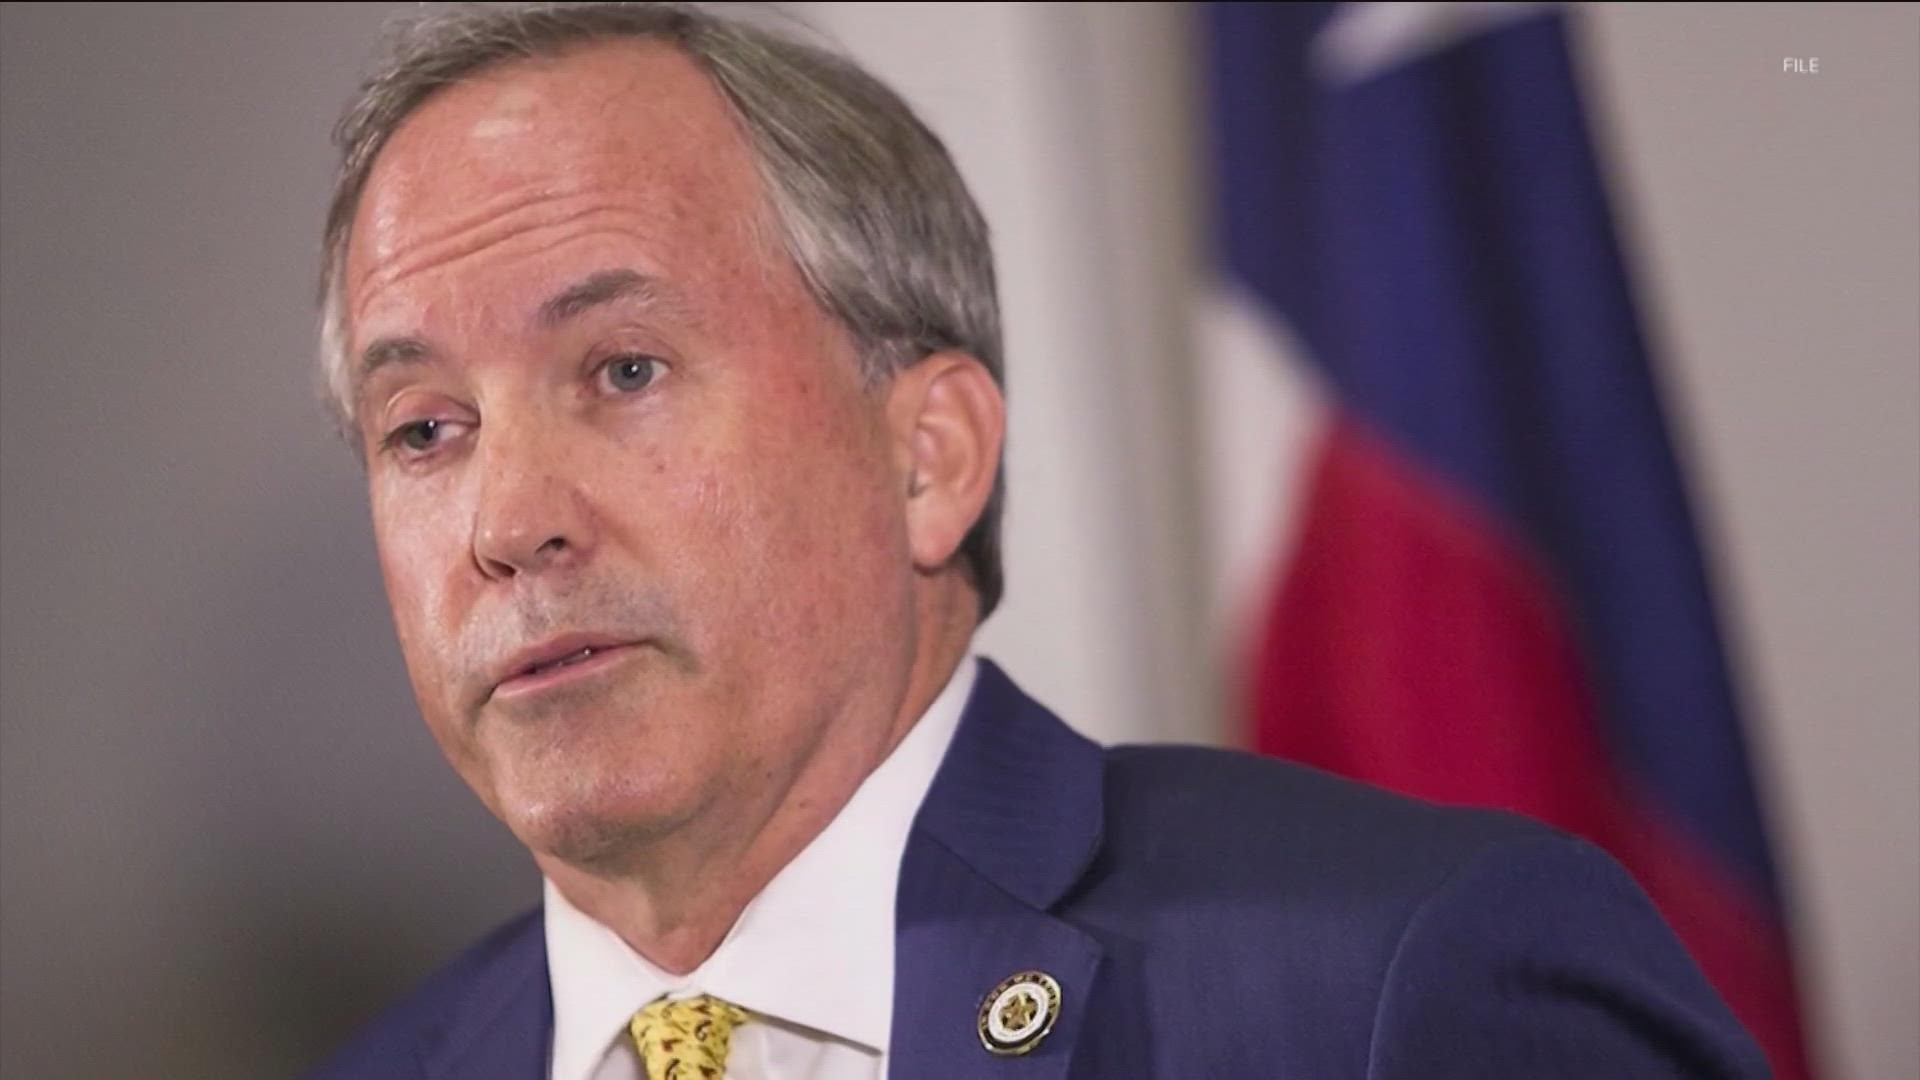 The Department of Justice is taking over the investigation into Texas Attorney General Ken Paxton and accusations of bribery and abuse of office made against him.